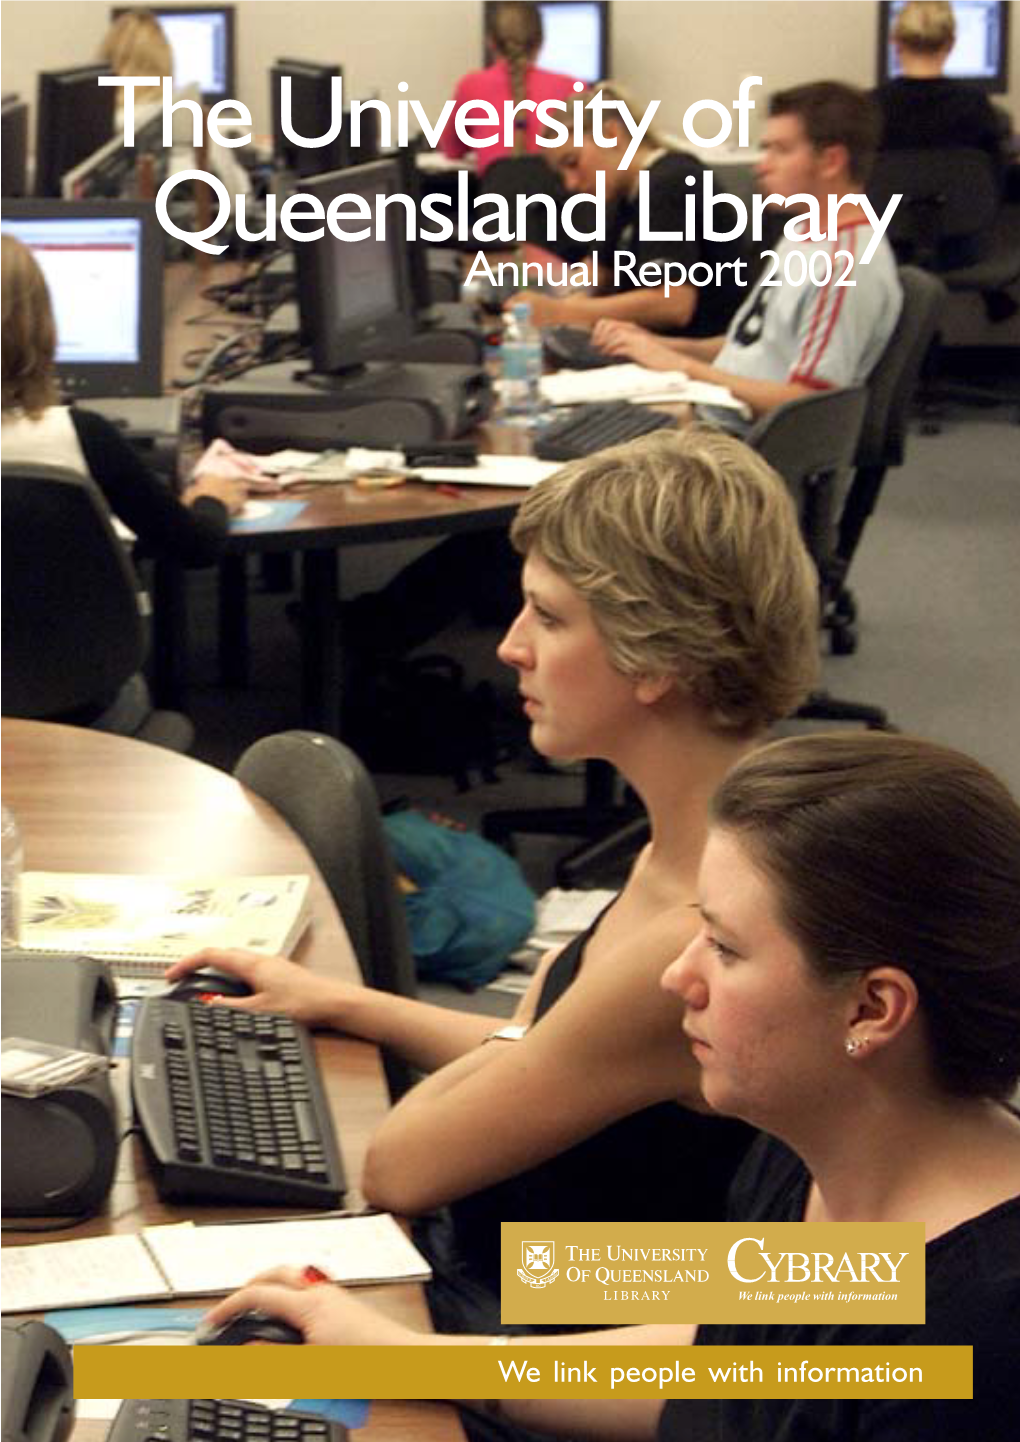 The University of Queensland Library Annual Report 2002